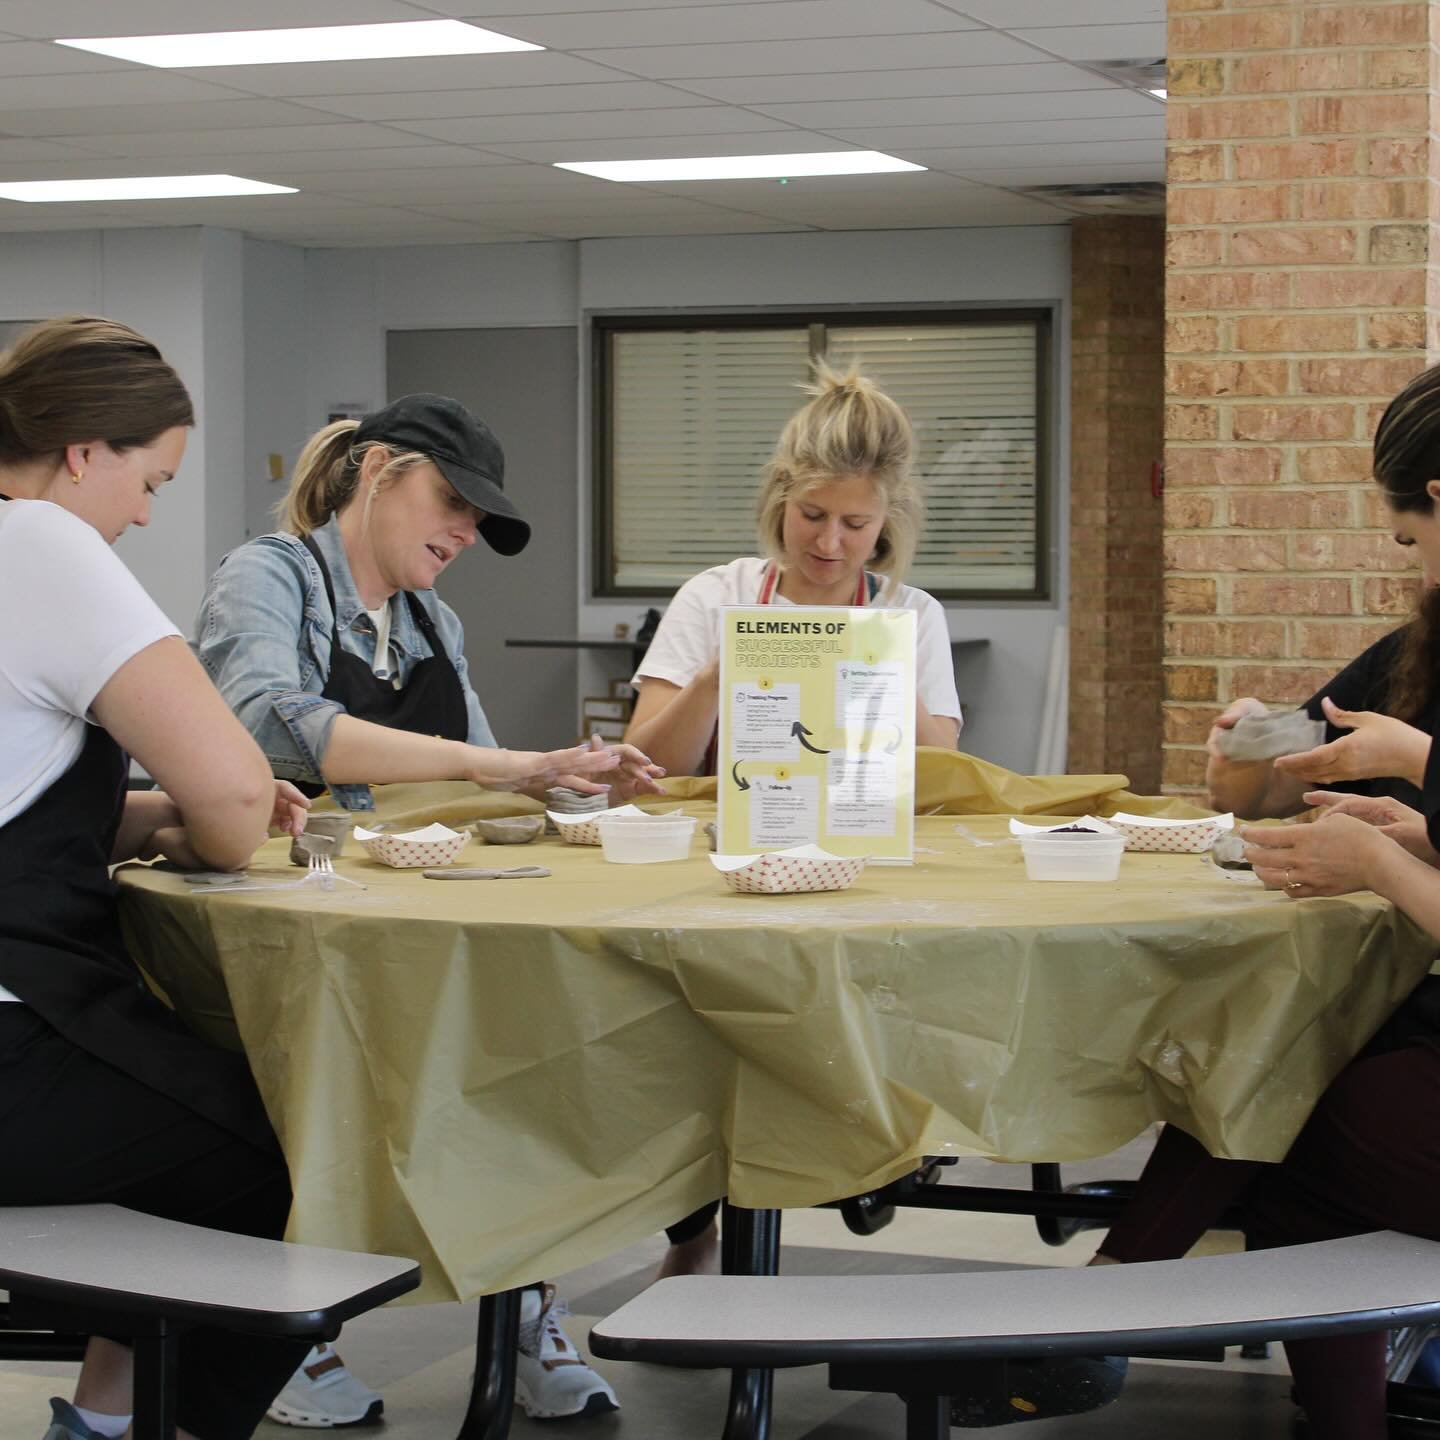 Our staff got to enjoy some various types of Wellness activities during their Professional Development today✨

All the different sessions were engaging and informative! 
From candle making and ceramics, to kickball and step class—our staff had 